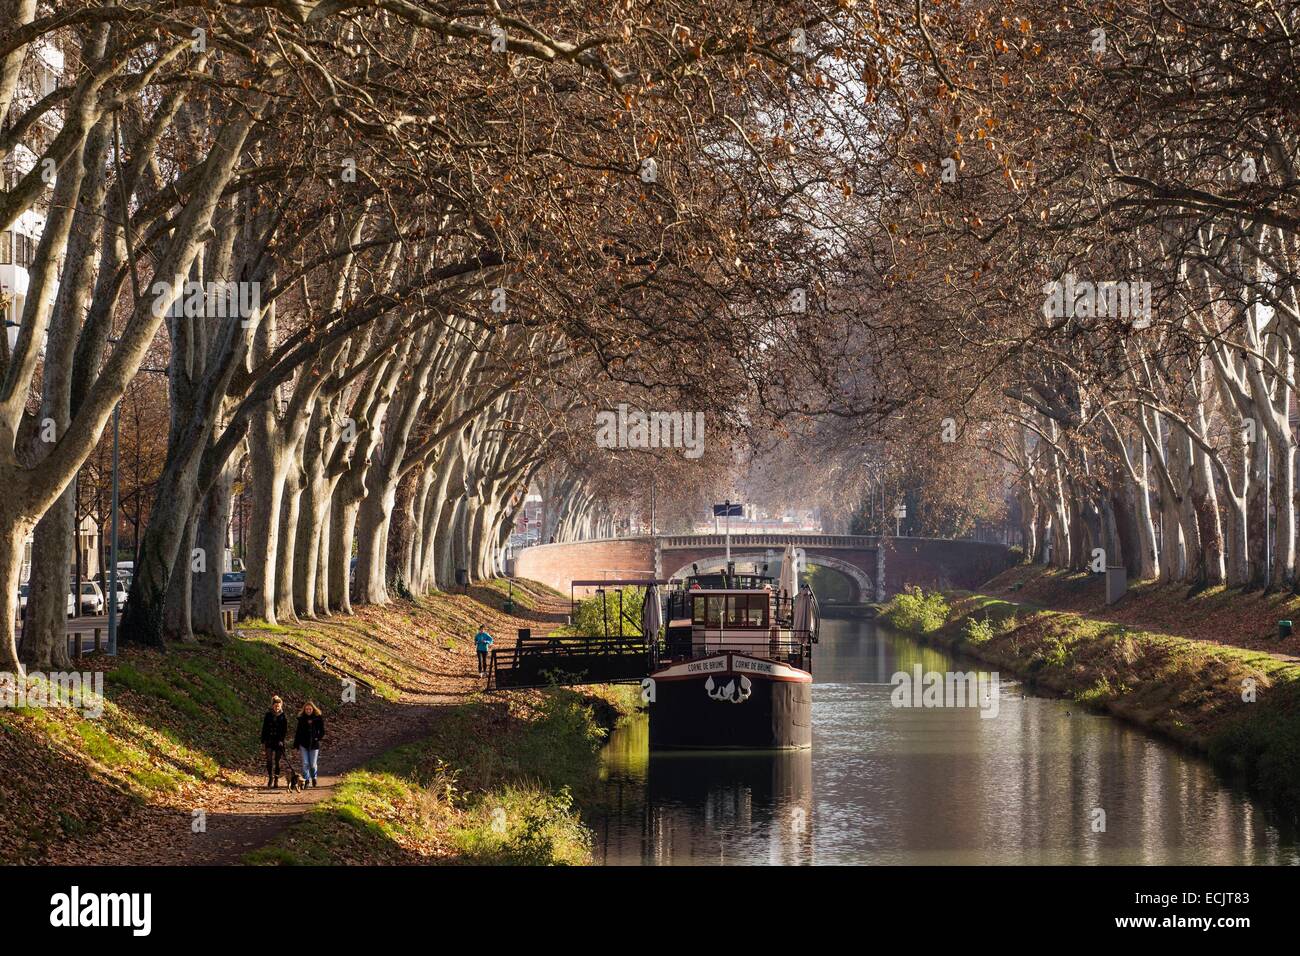 France, Haute Garonne, Toulouse, Canal de Brienne, Brienne channel is a channel that connects the Garonne and the Canal du Midi listed as World Heritage by UNESCO in Toulouse Stock Photo